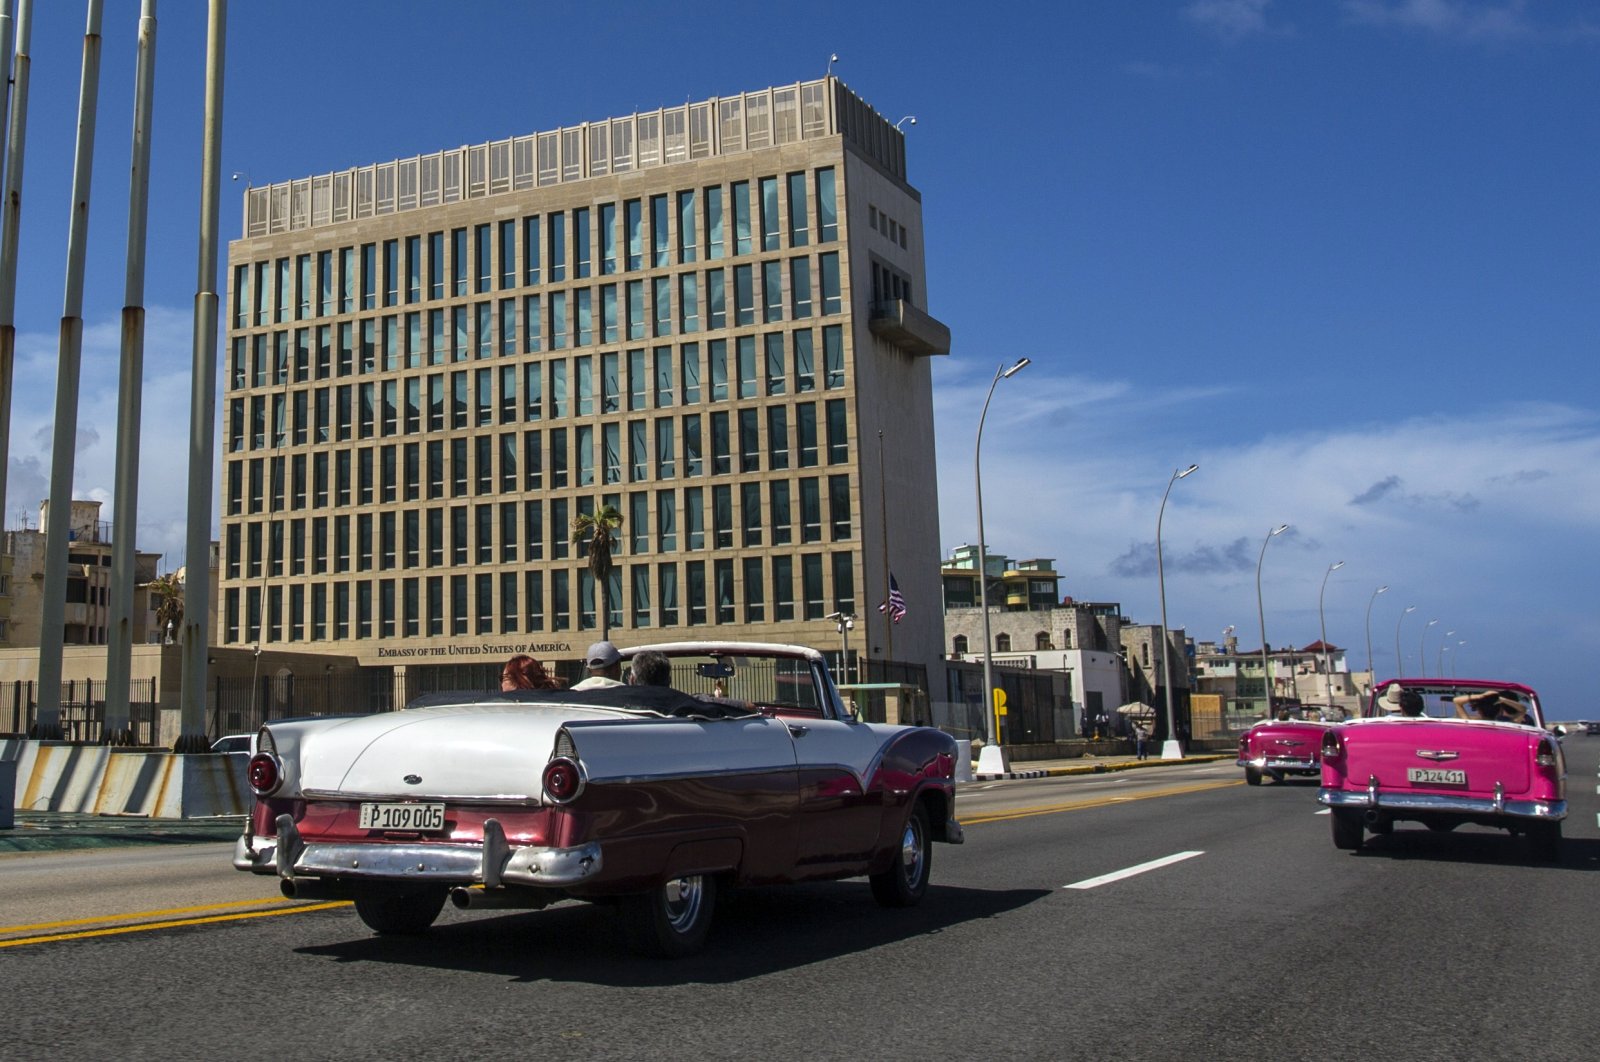 Tourists ride classic convertible cars on the Malecon beside the U.S. Embassy in Havana, Cuba, Oct. 3, 2017. (AP Photo)